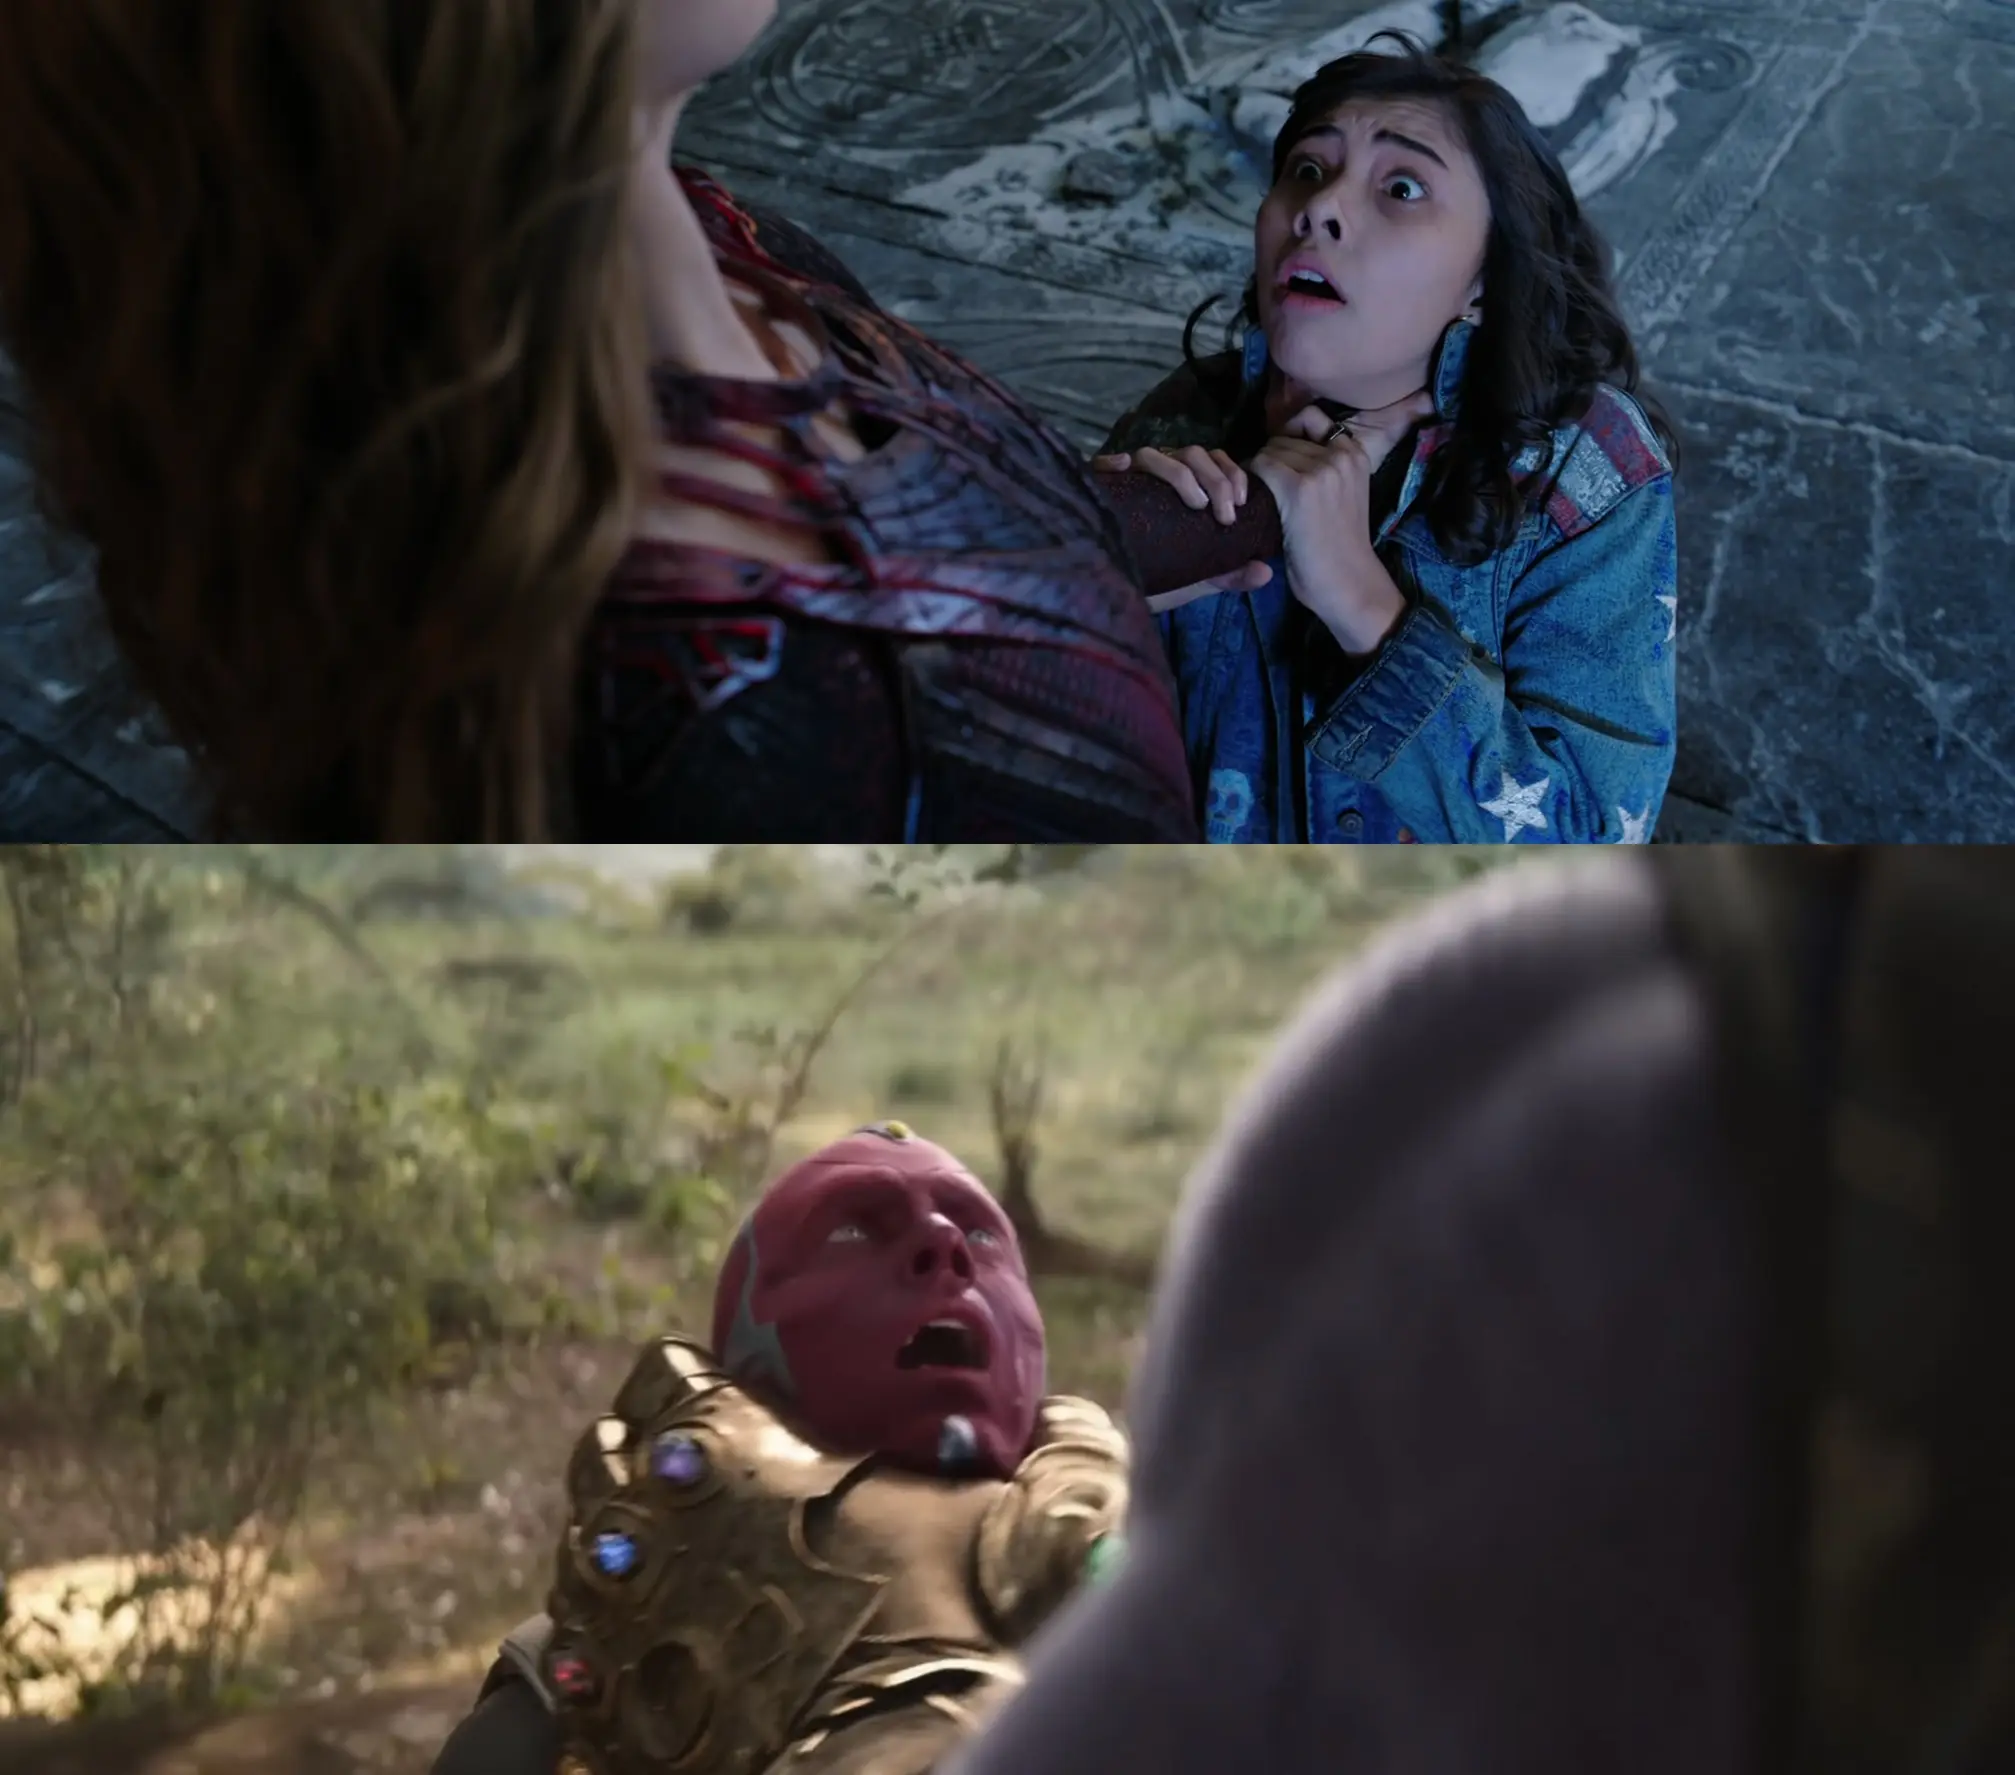 Parallel is created between Scarlet Witch and Thanos.